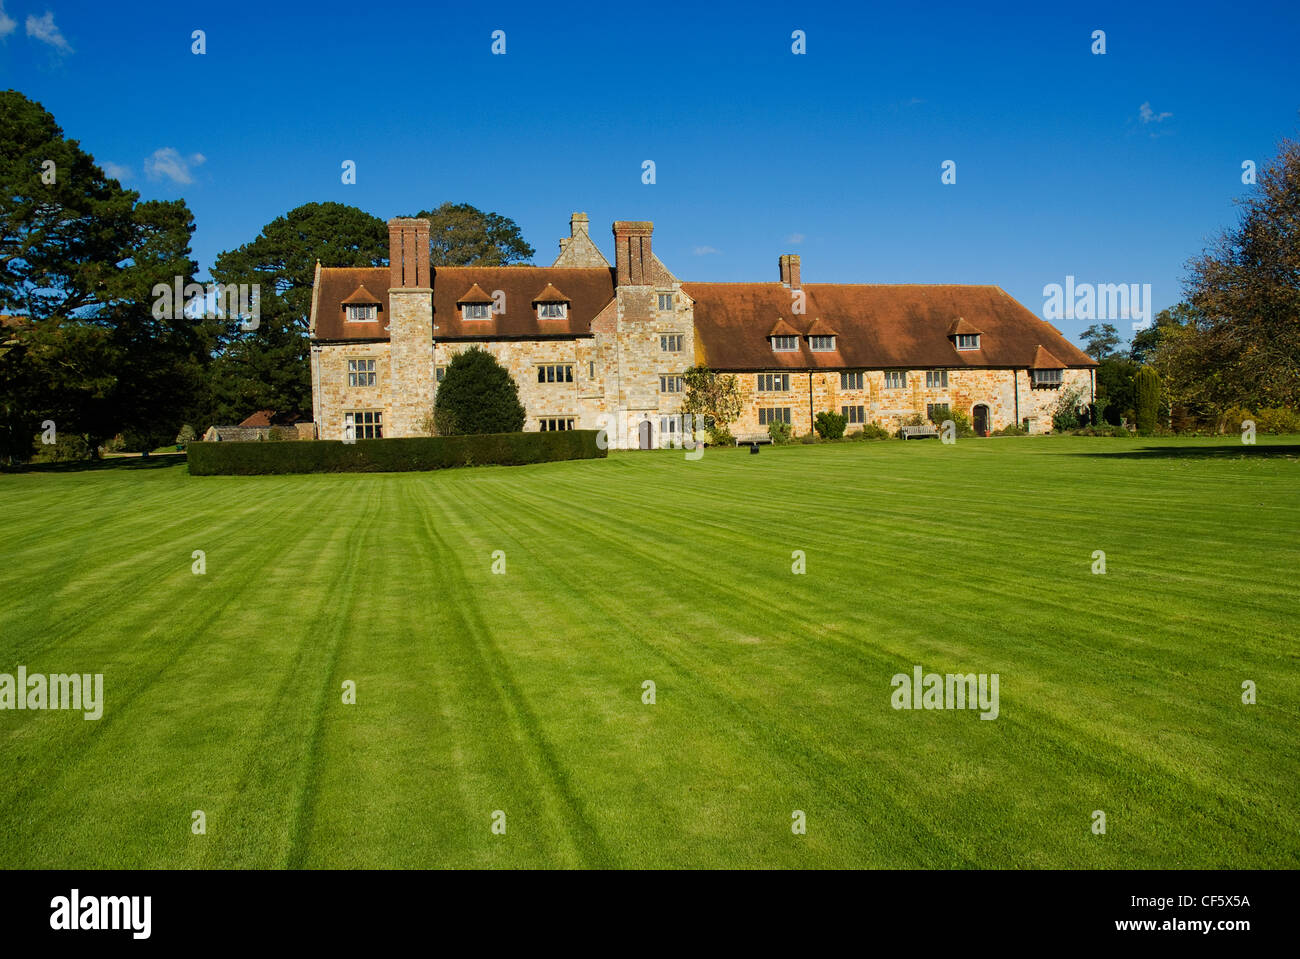 Michelham Priory and Gardens, a tudor mansion that evolved from a former Augustinian Priory. Stock Photo